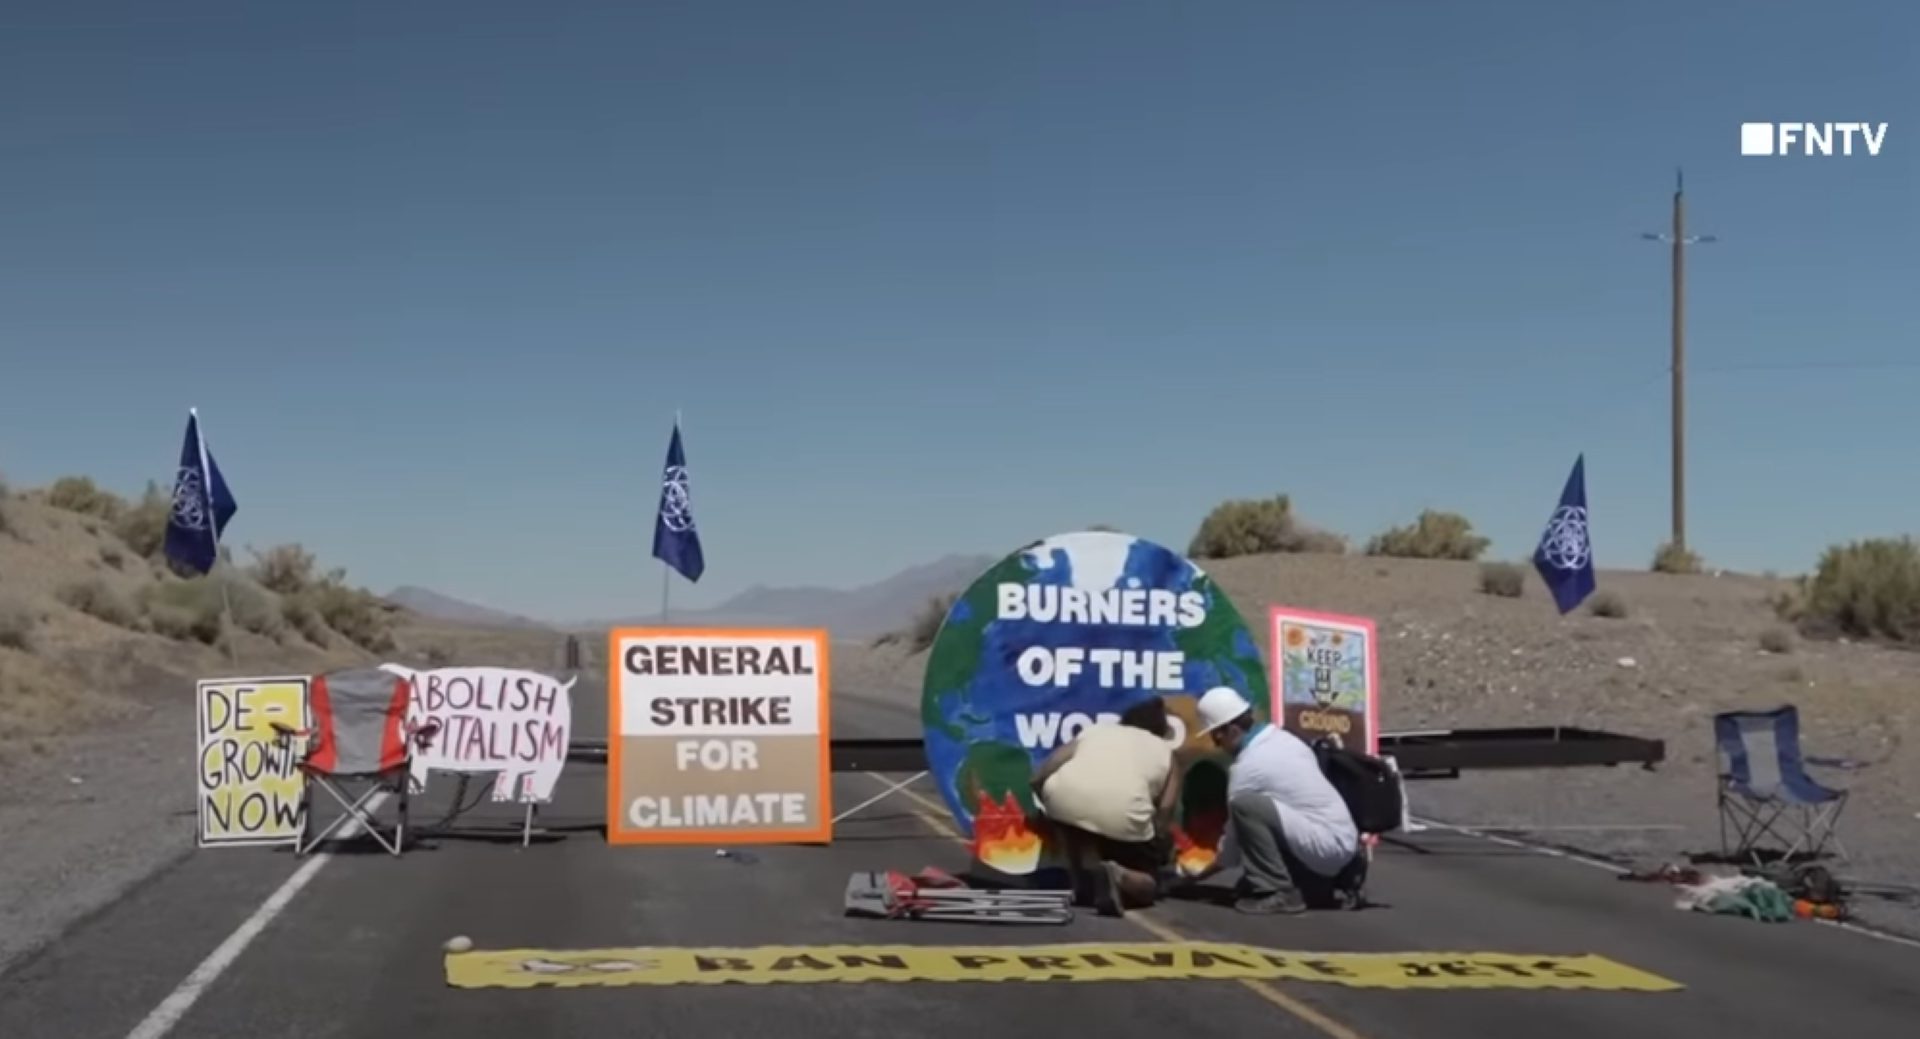 Climate protestors tried to block the festival